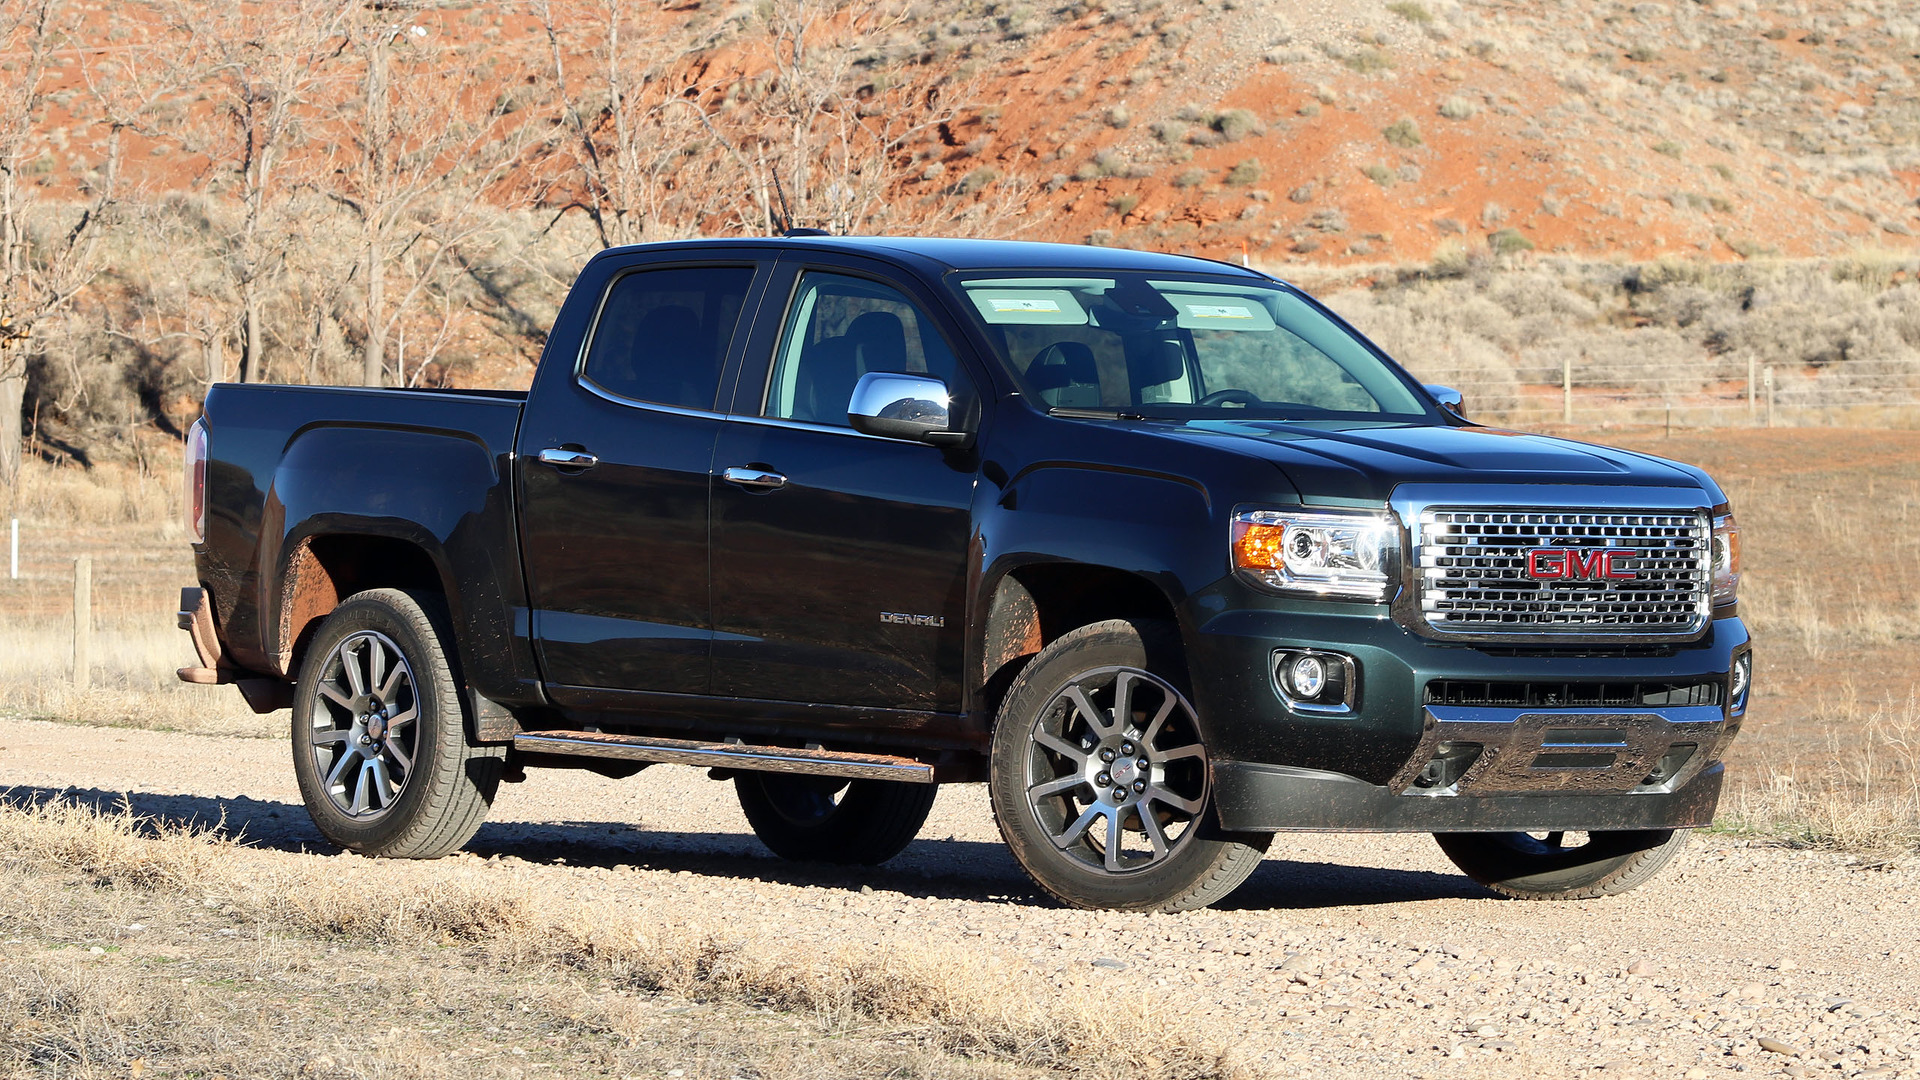 2017 GMC Canyon Denali Review: What am I paying for, again?